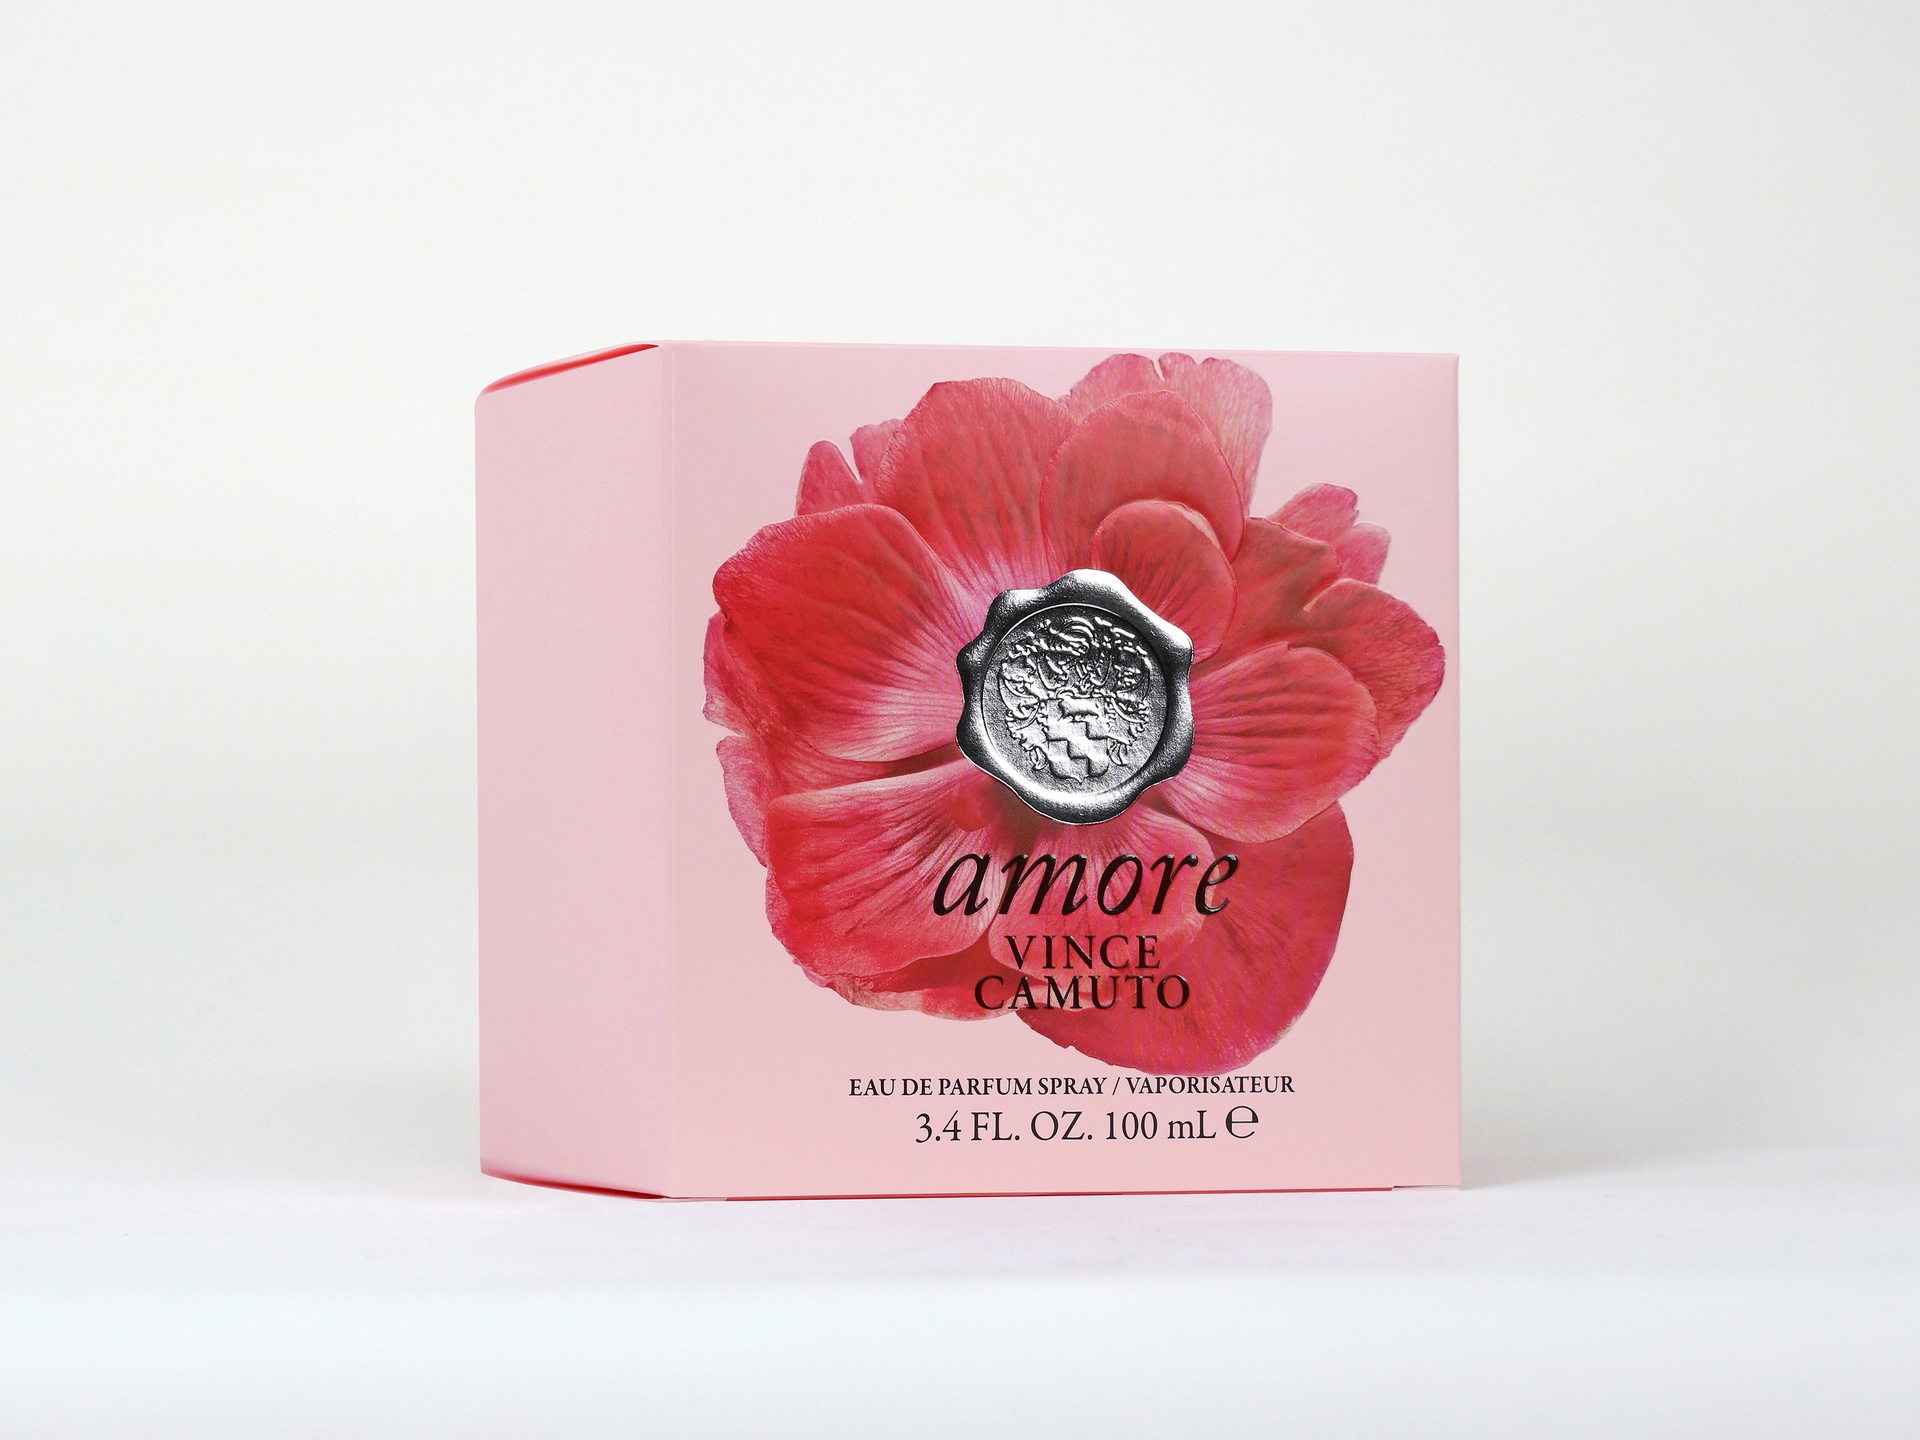 Amore Vince Camuto packaging